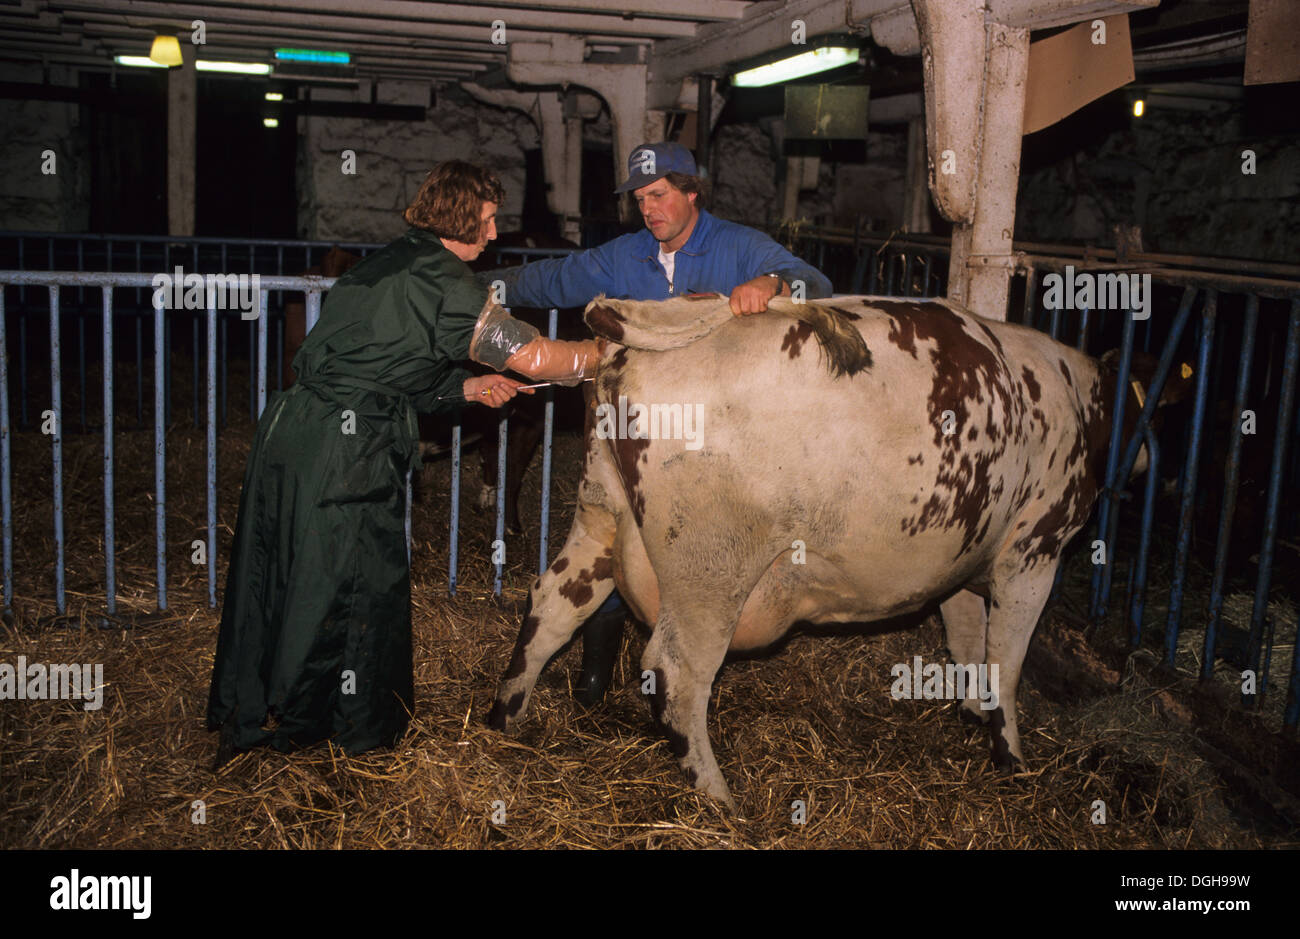 Cattle farming, specialist worker preforming artificial insemination on cow, Sweden Stock Photo